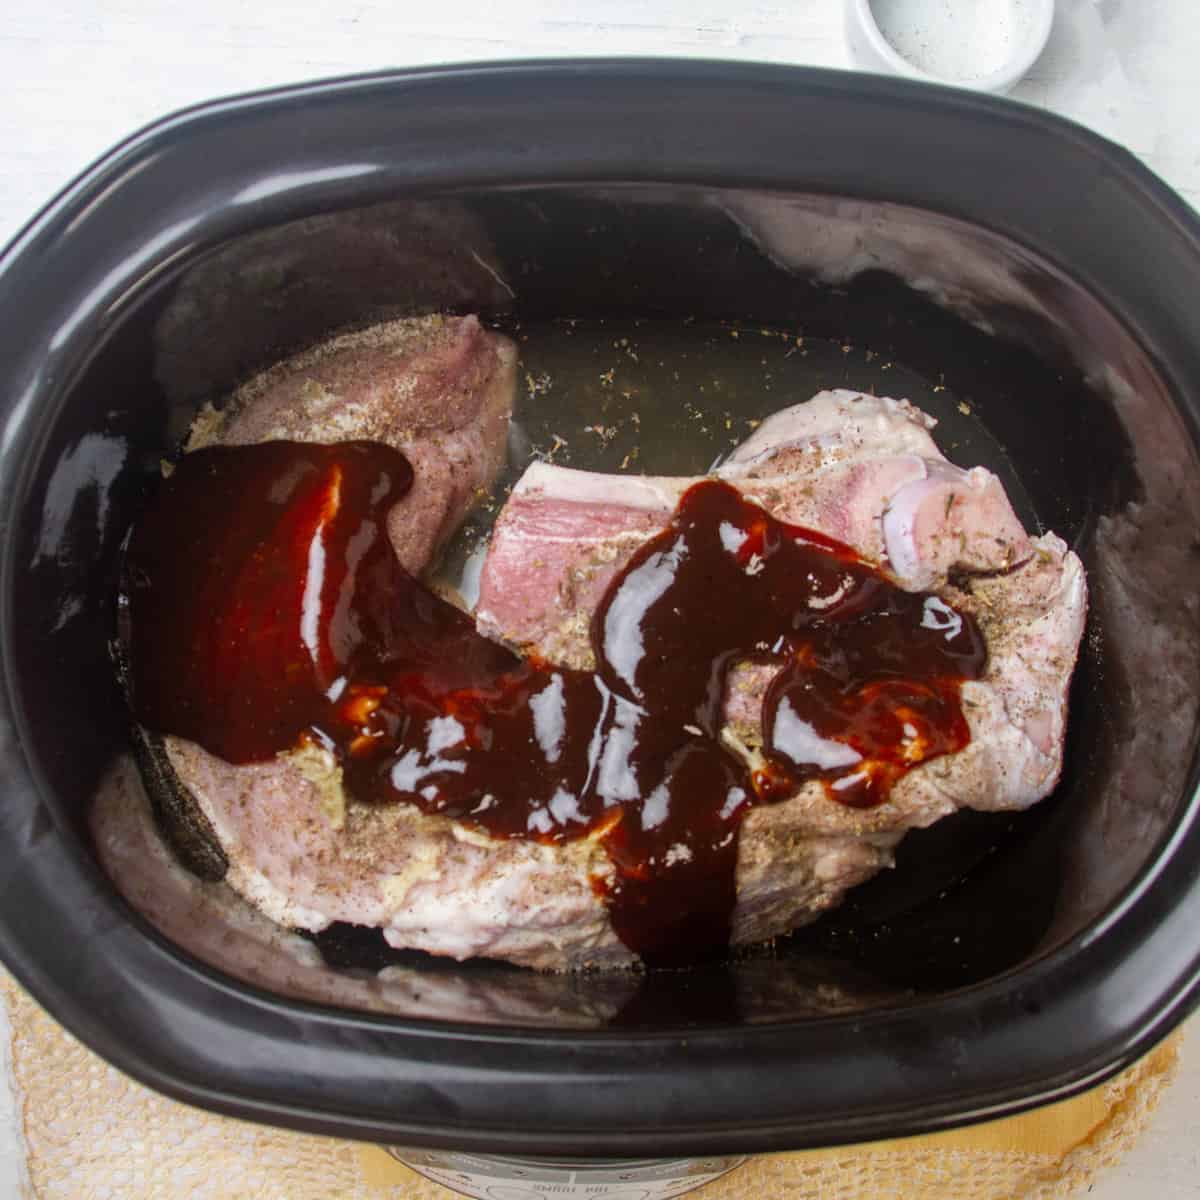 Coat the meat with a mixture of BBQ sauce, vinegar, and chicken broth.